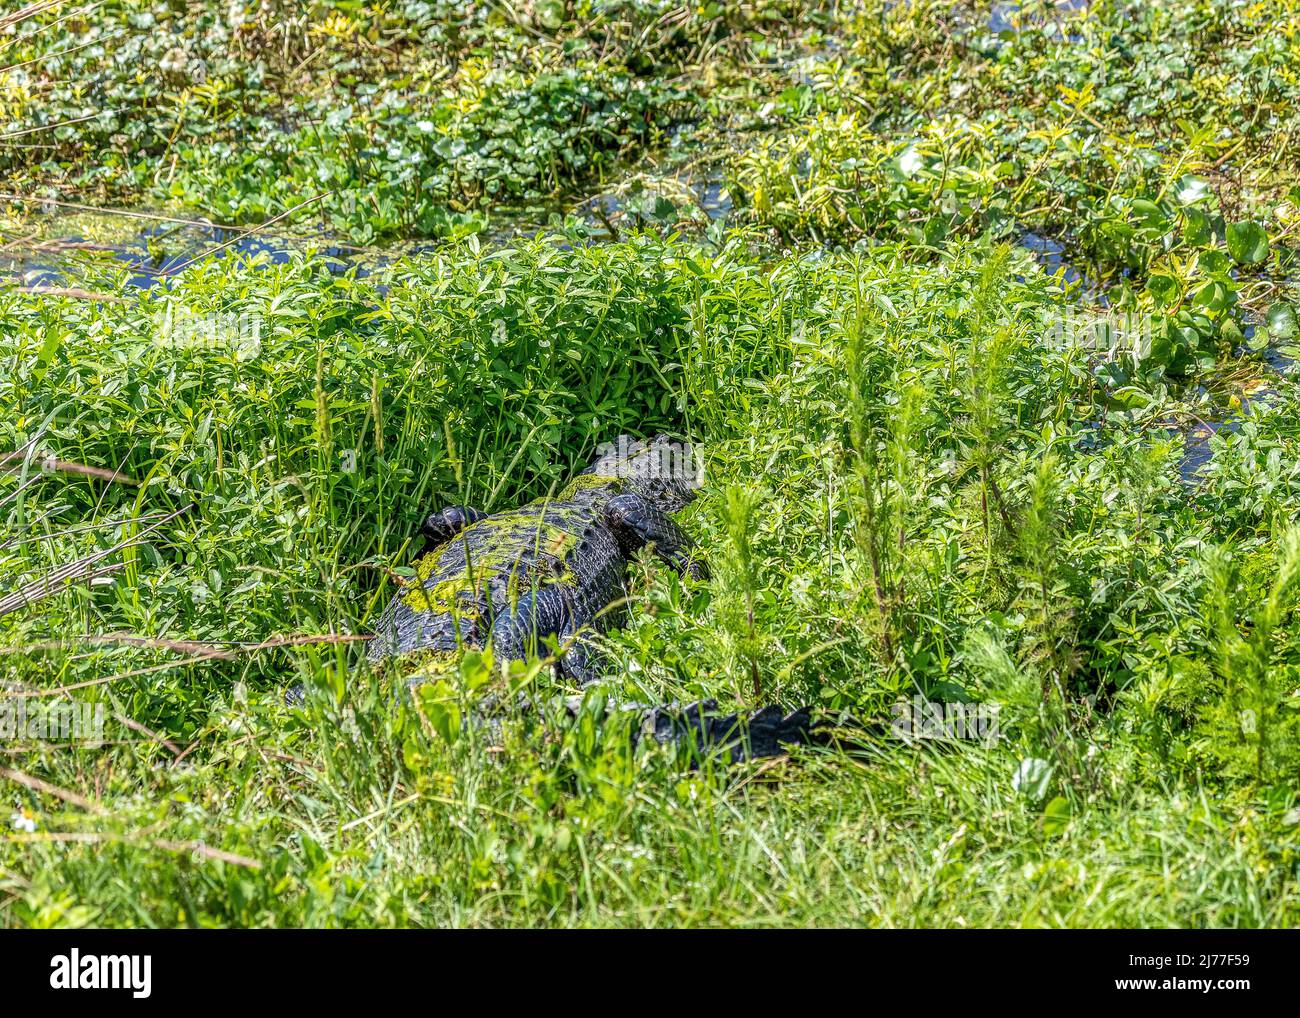 Large alligator in the tall weeds along the waterway Stock Photo